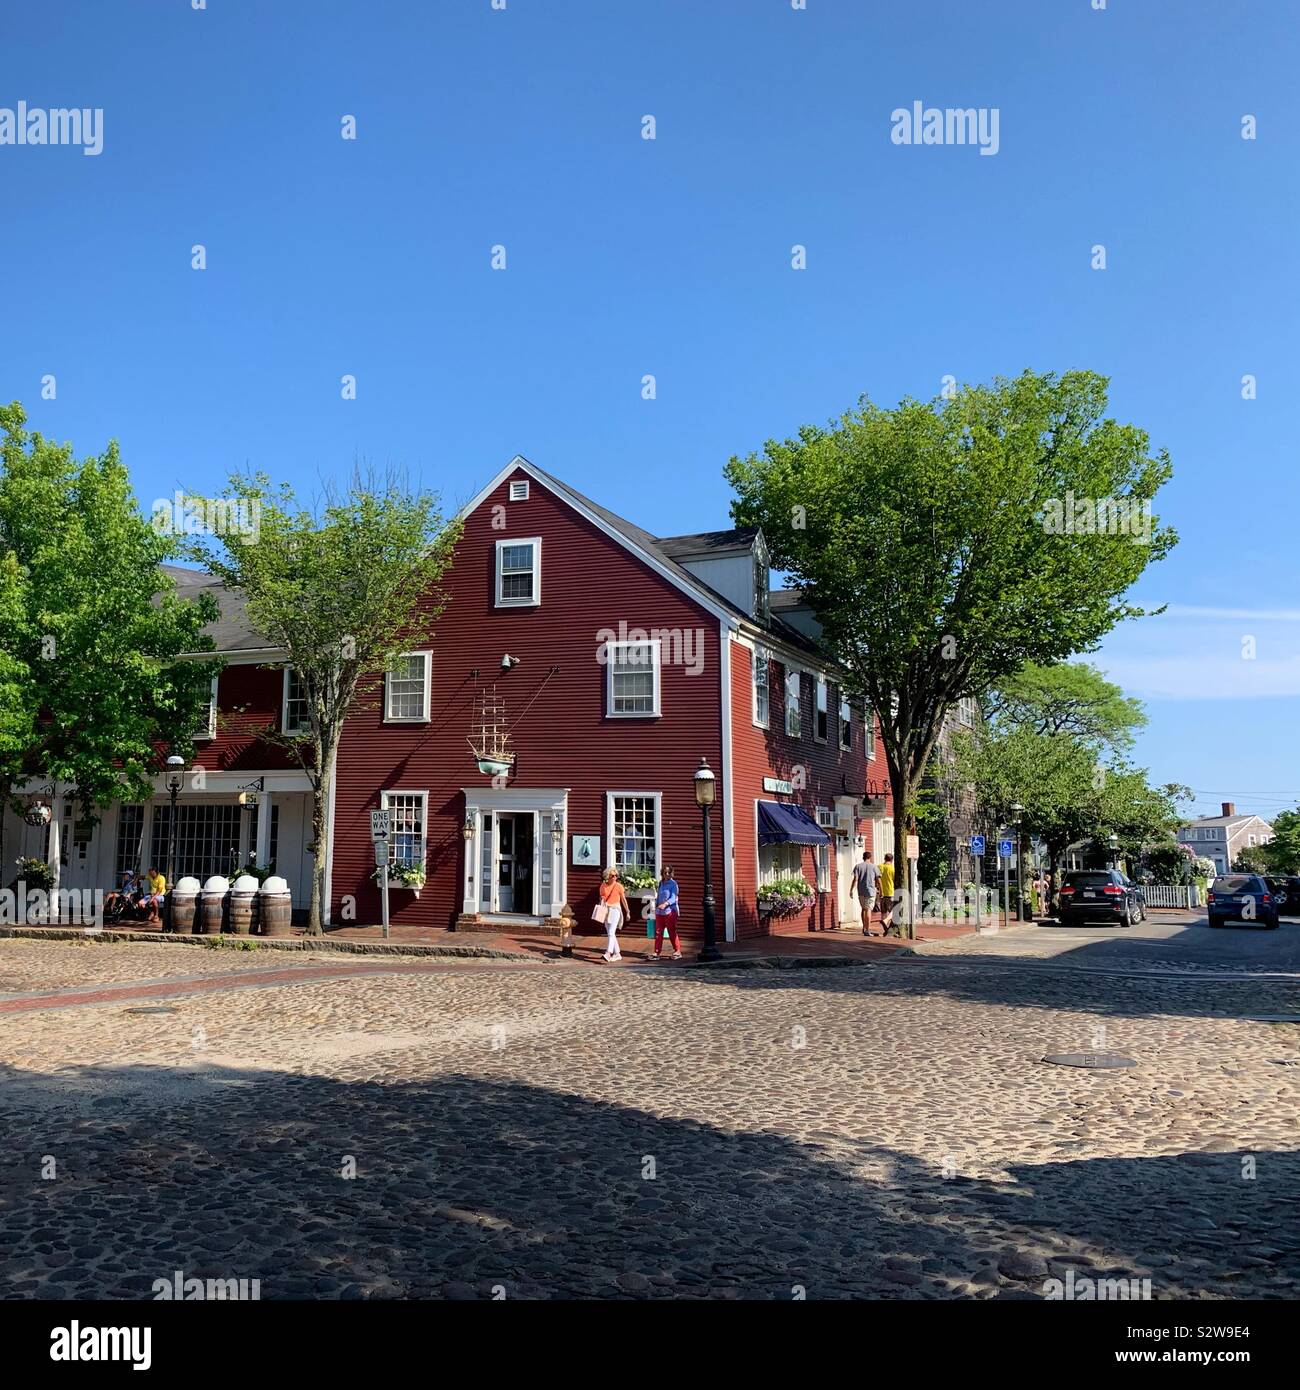 A red building on the cobblestone streets of Nantucket, Massachusetts, United States Stock Photo